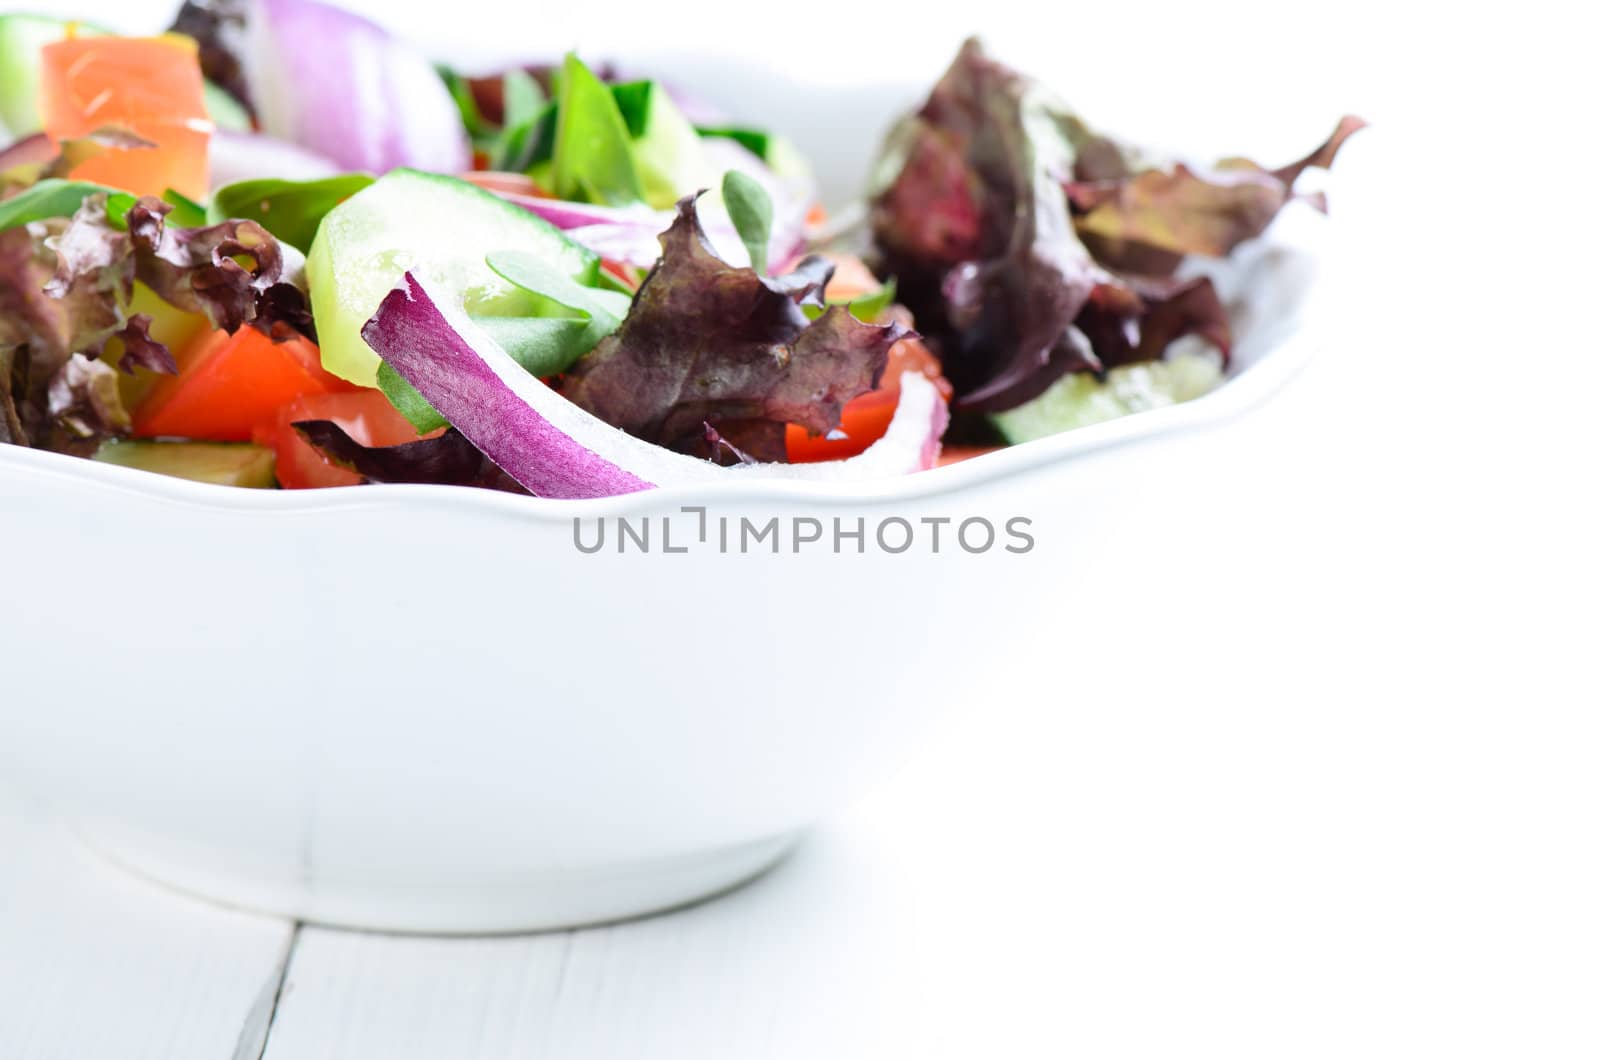 Vegetable Salad in white bowl on wooden table